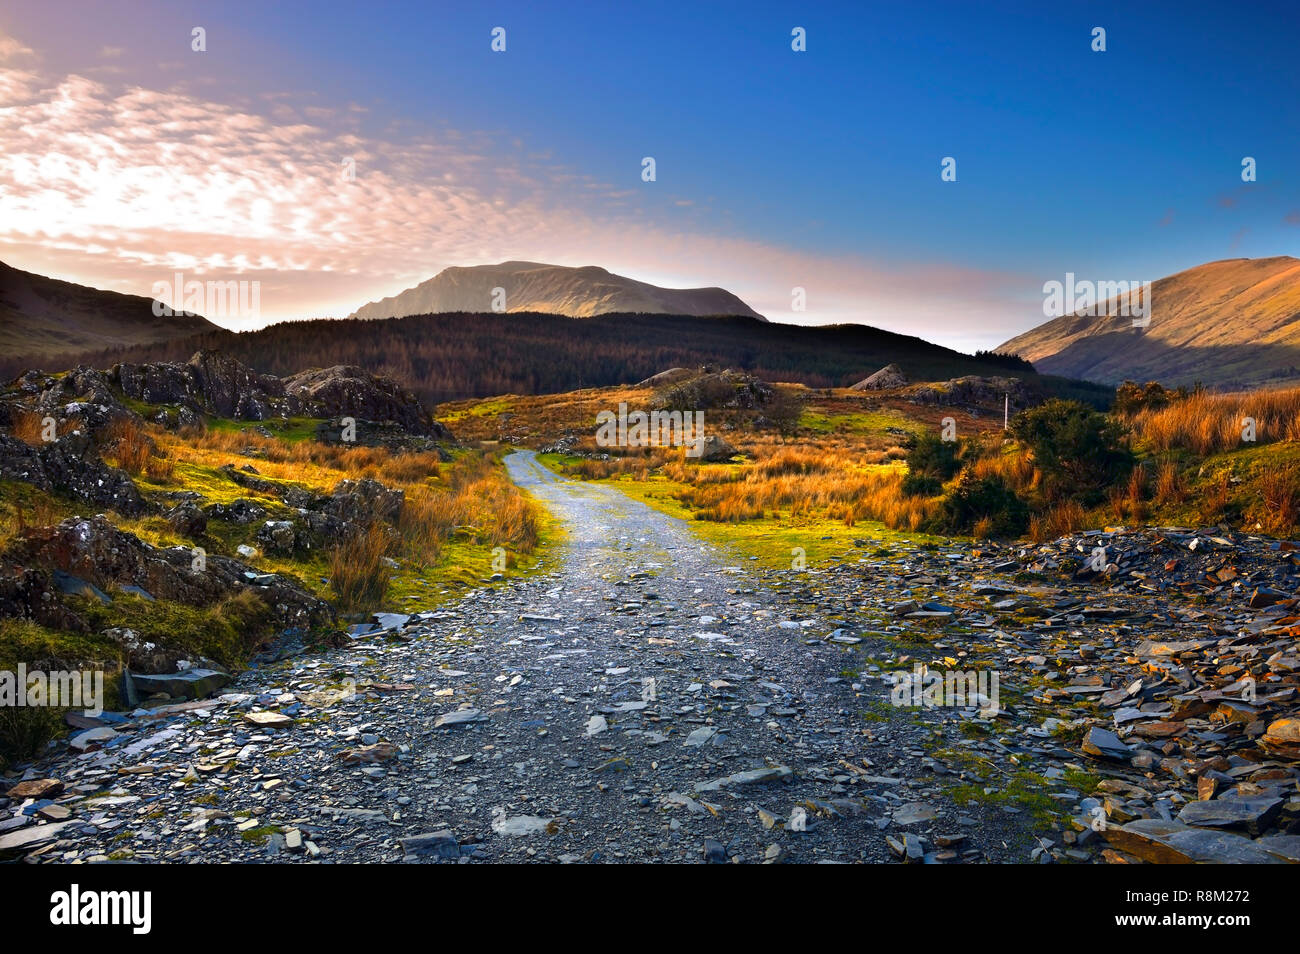 A winter view of a remote path in the rugged Snowdonia National Park, North Wales. Stock Photo